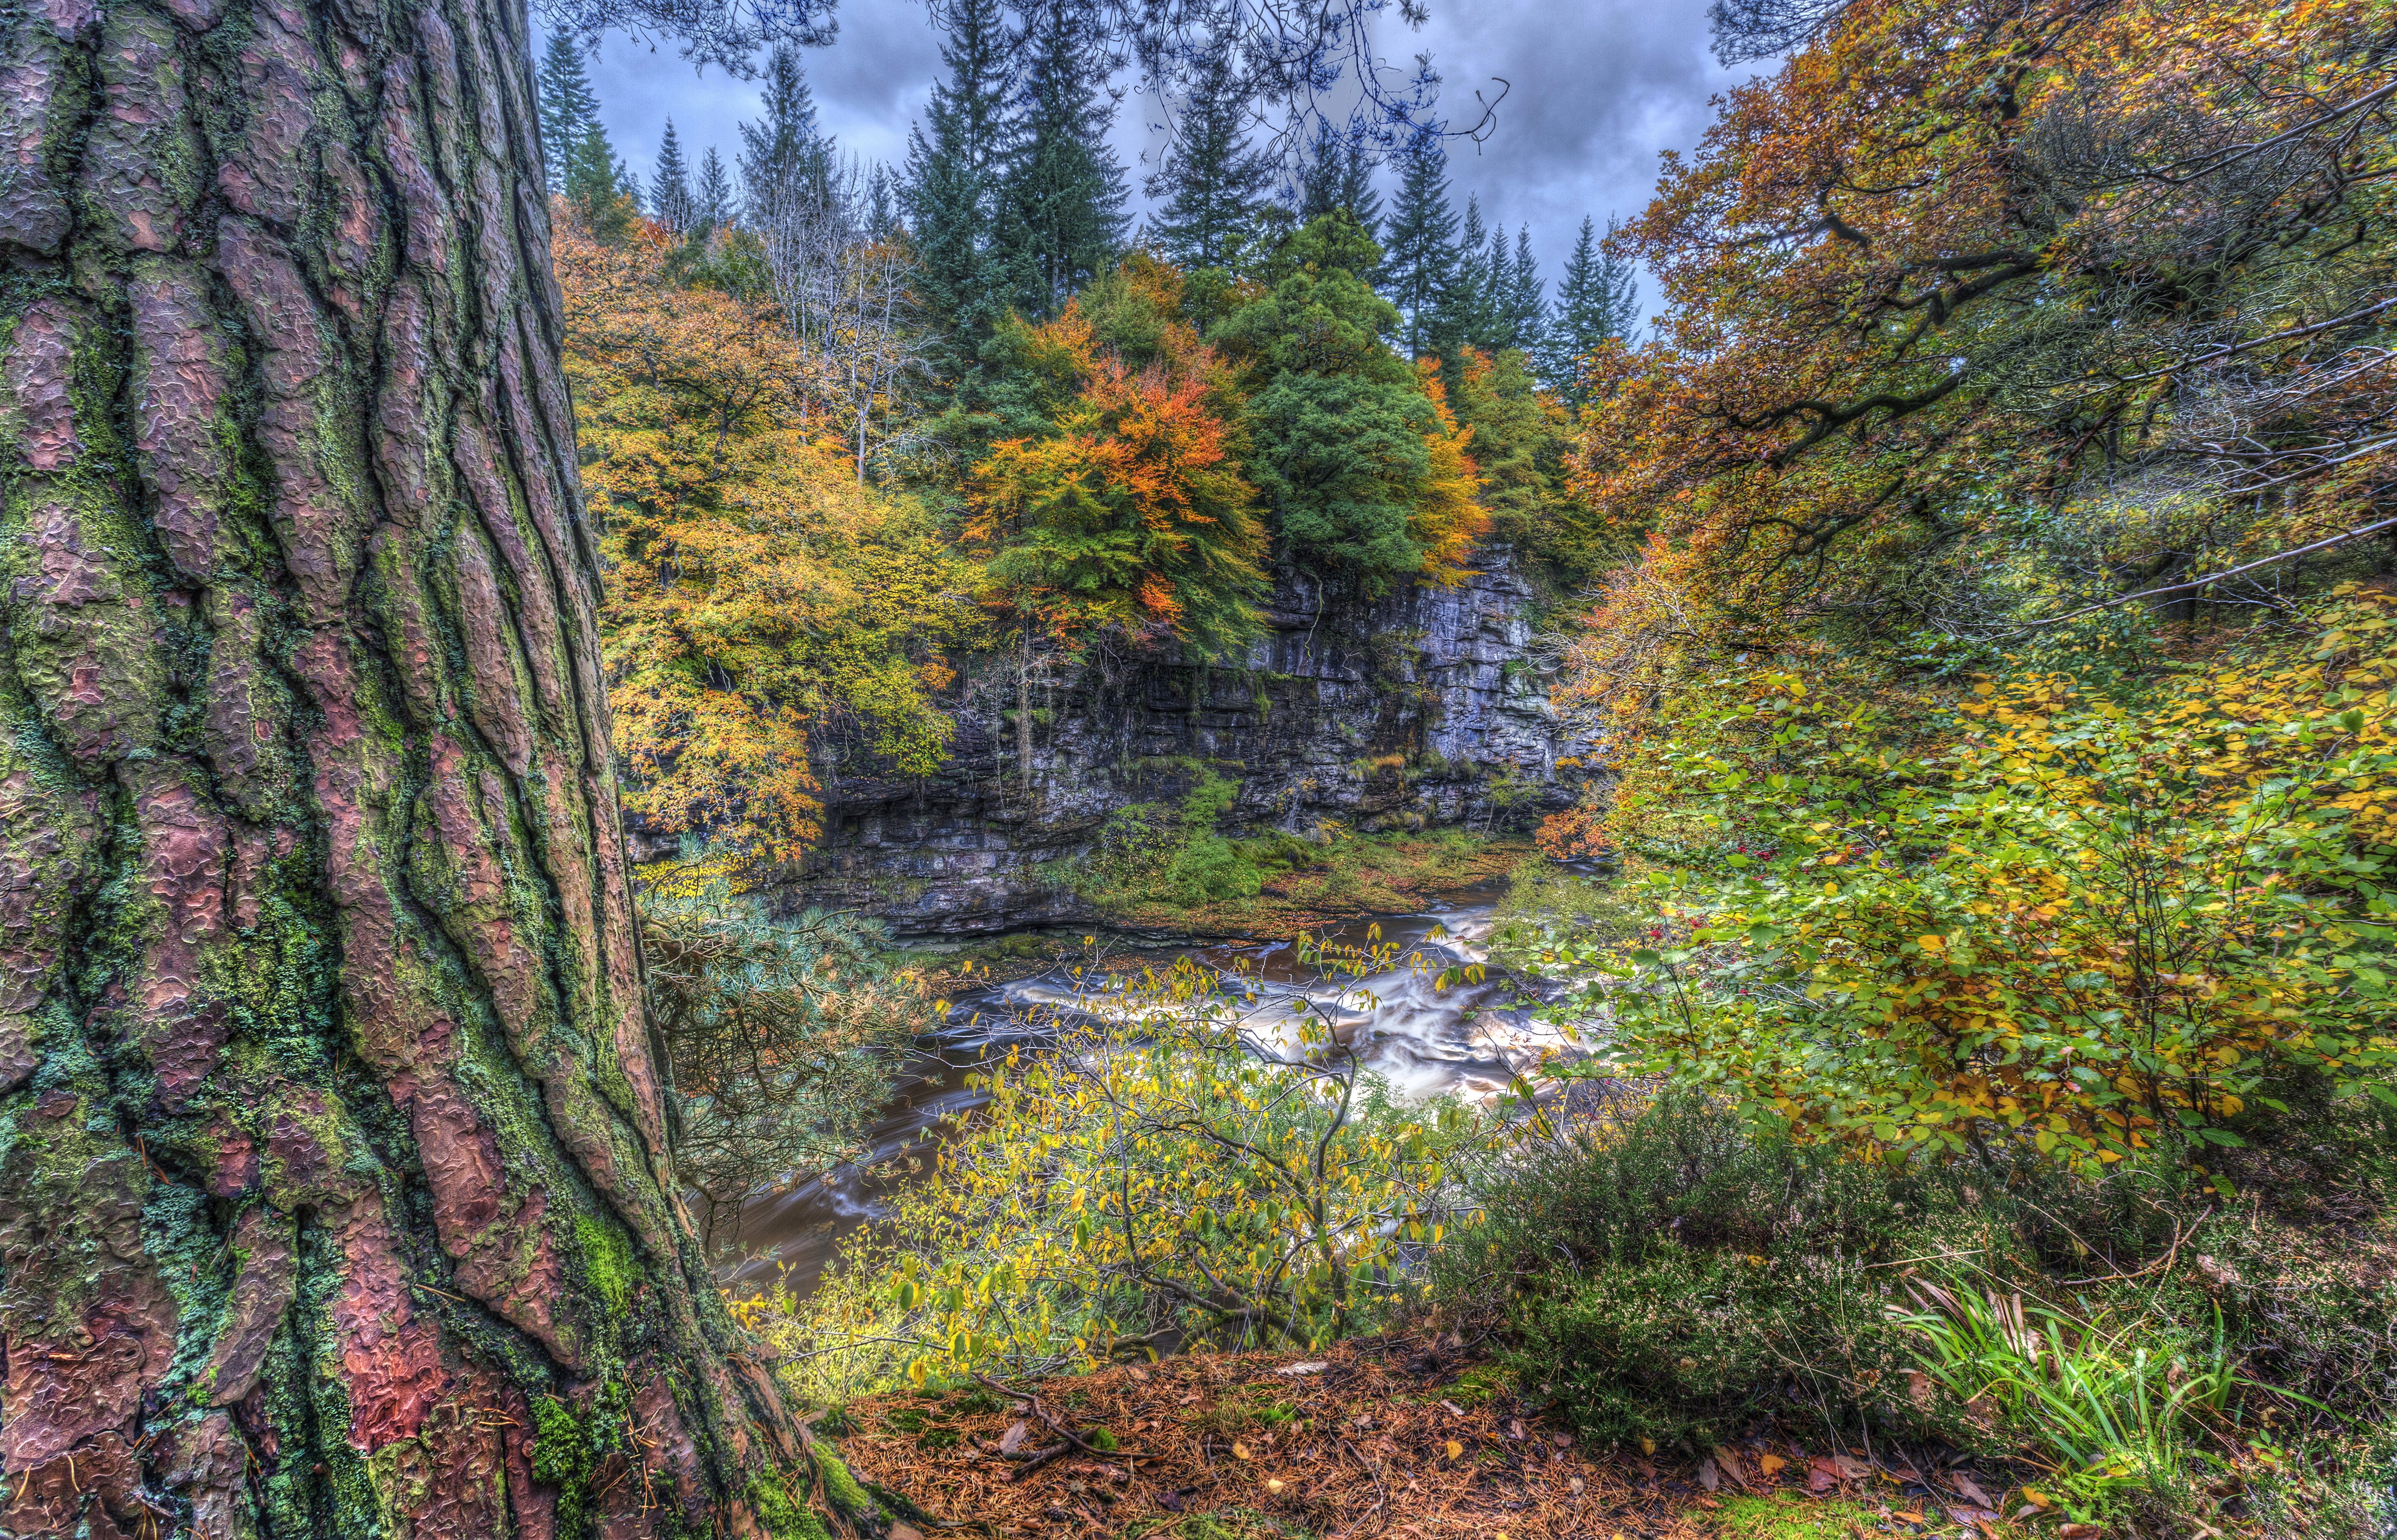 scotland, Rivers, Hdr, Trunk, Tree, Trees, Clyde, Valley, Woodlands, Nature Wallpaper